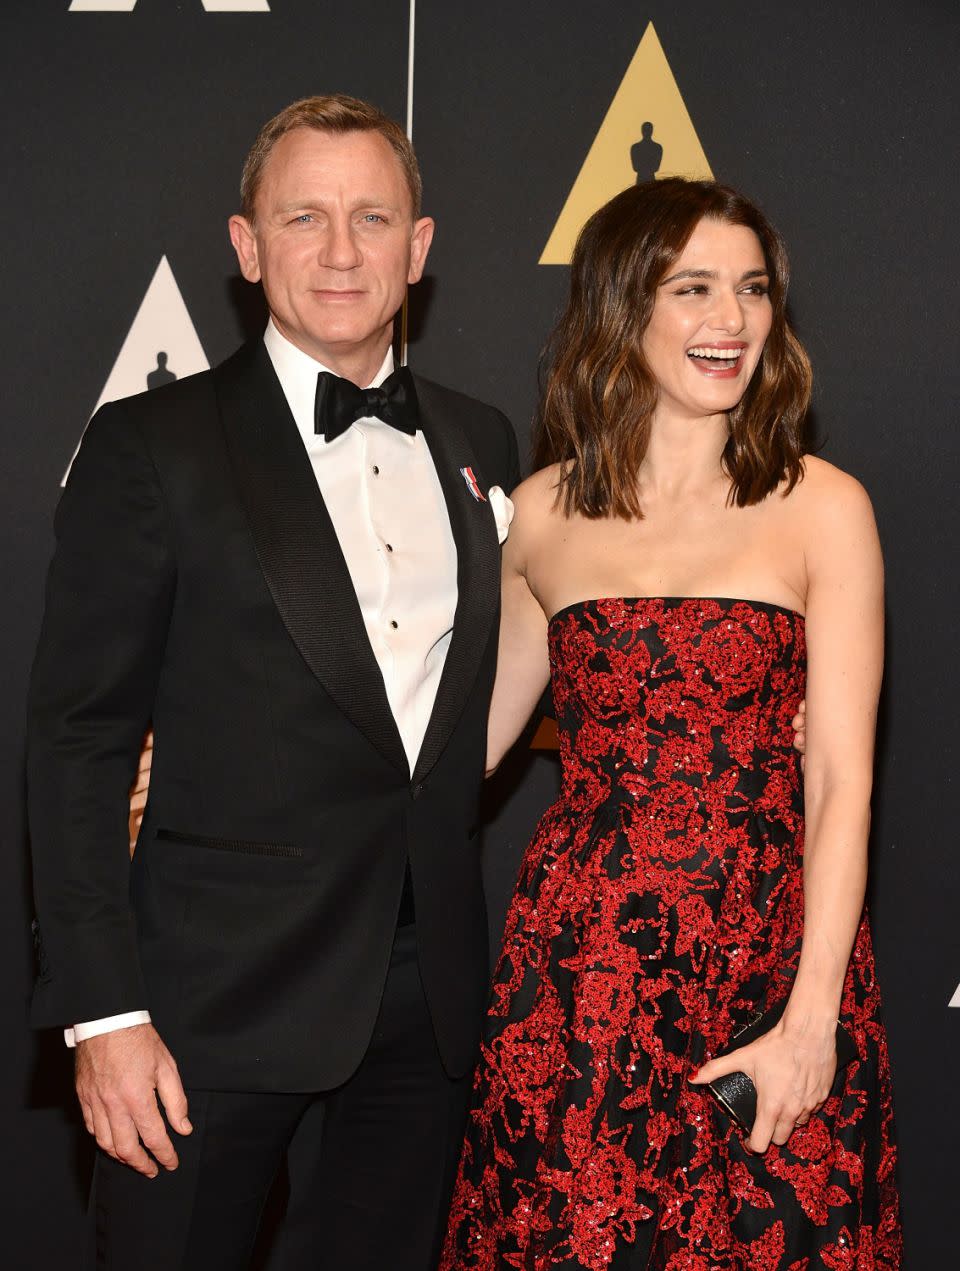 The couple are expecting their first child together. Photo: Getty